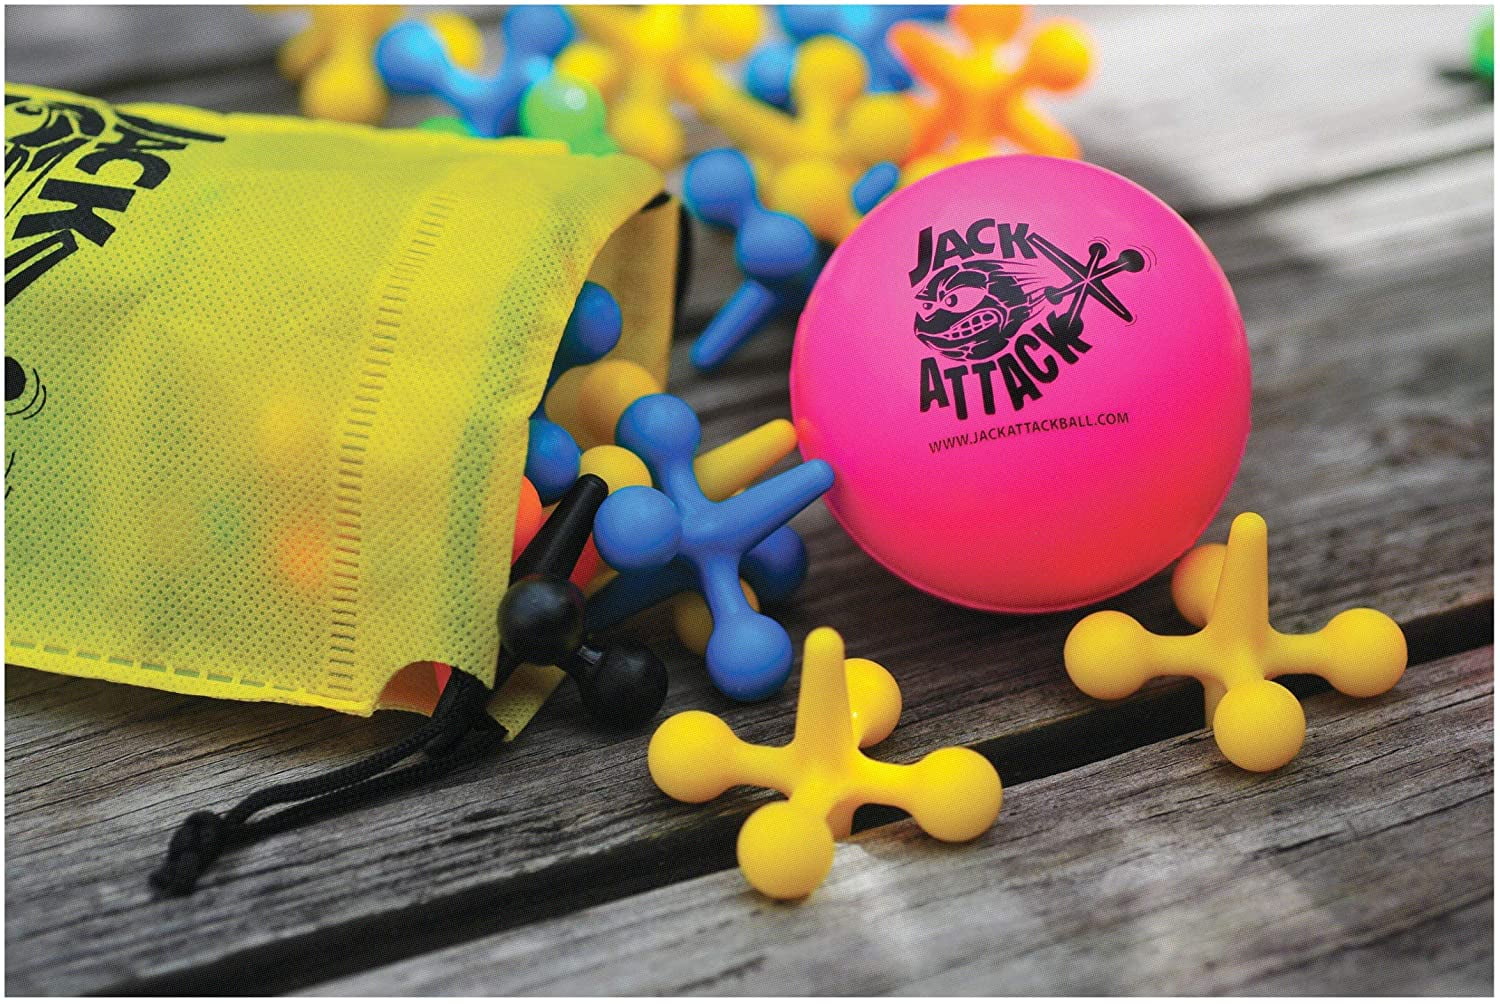 24 SETS OF NEW LARGE SIZE NEON JACKS AND RUBBER BOUNCE BALL GAME CLASSIC KID TOY 